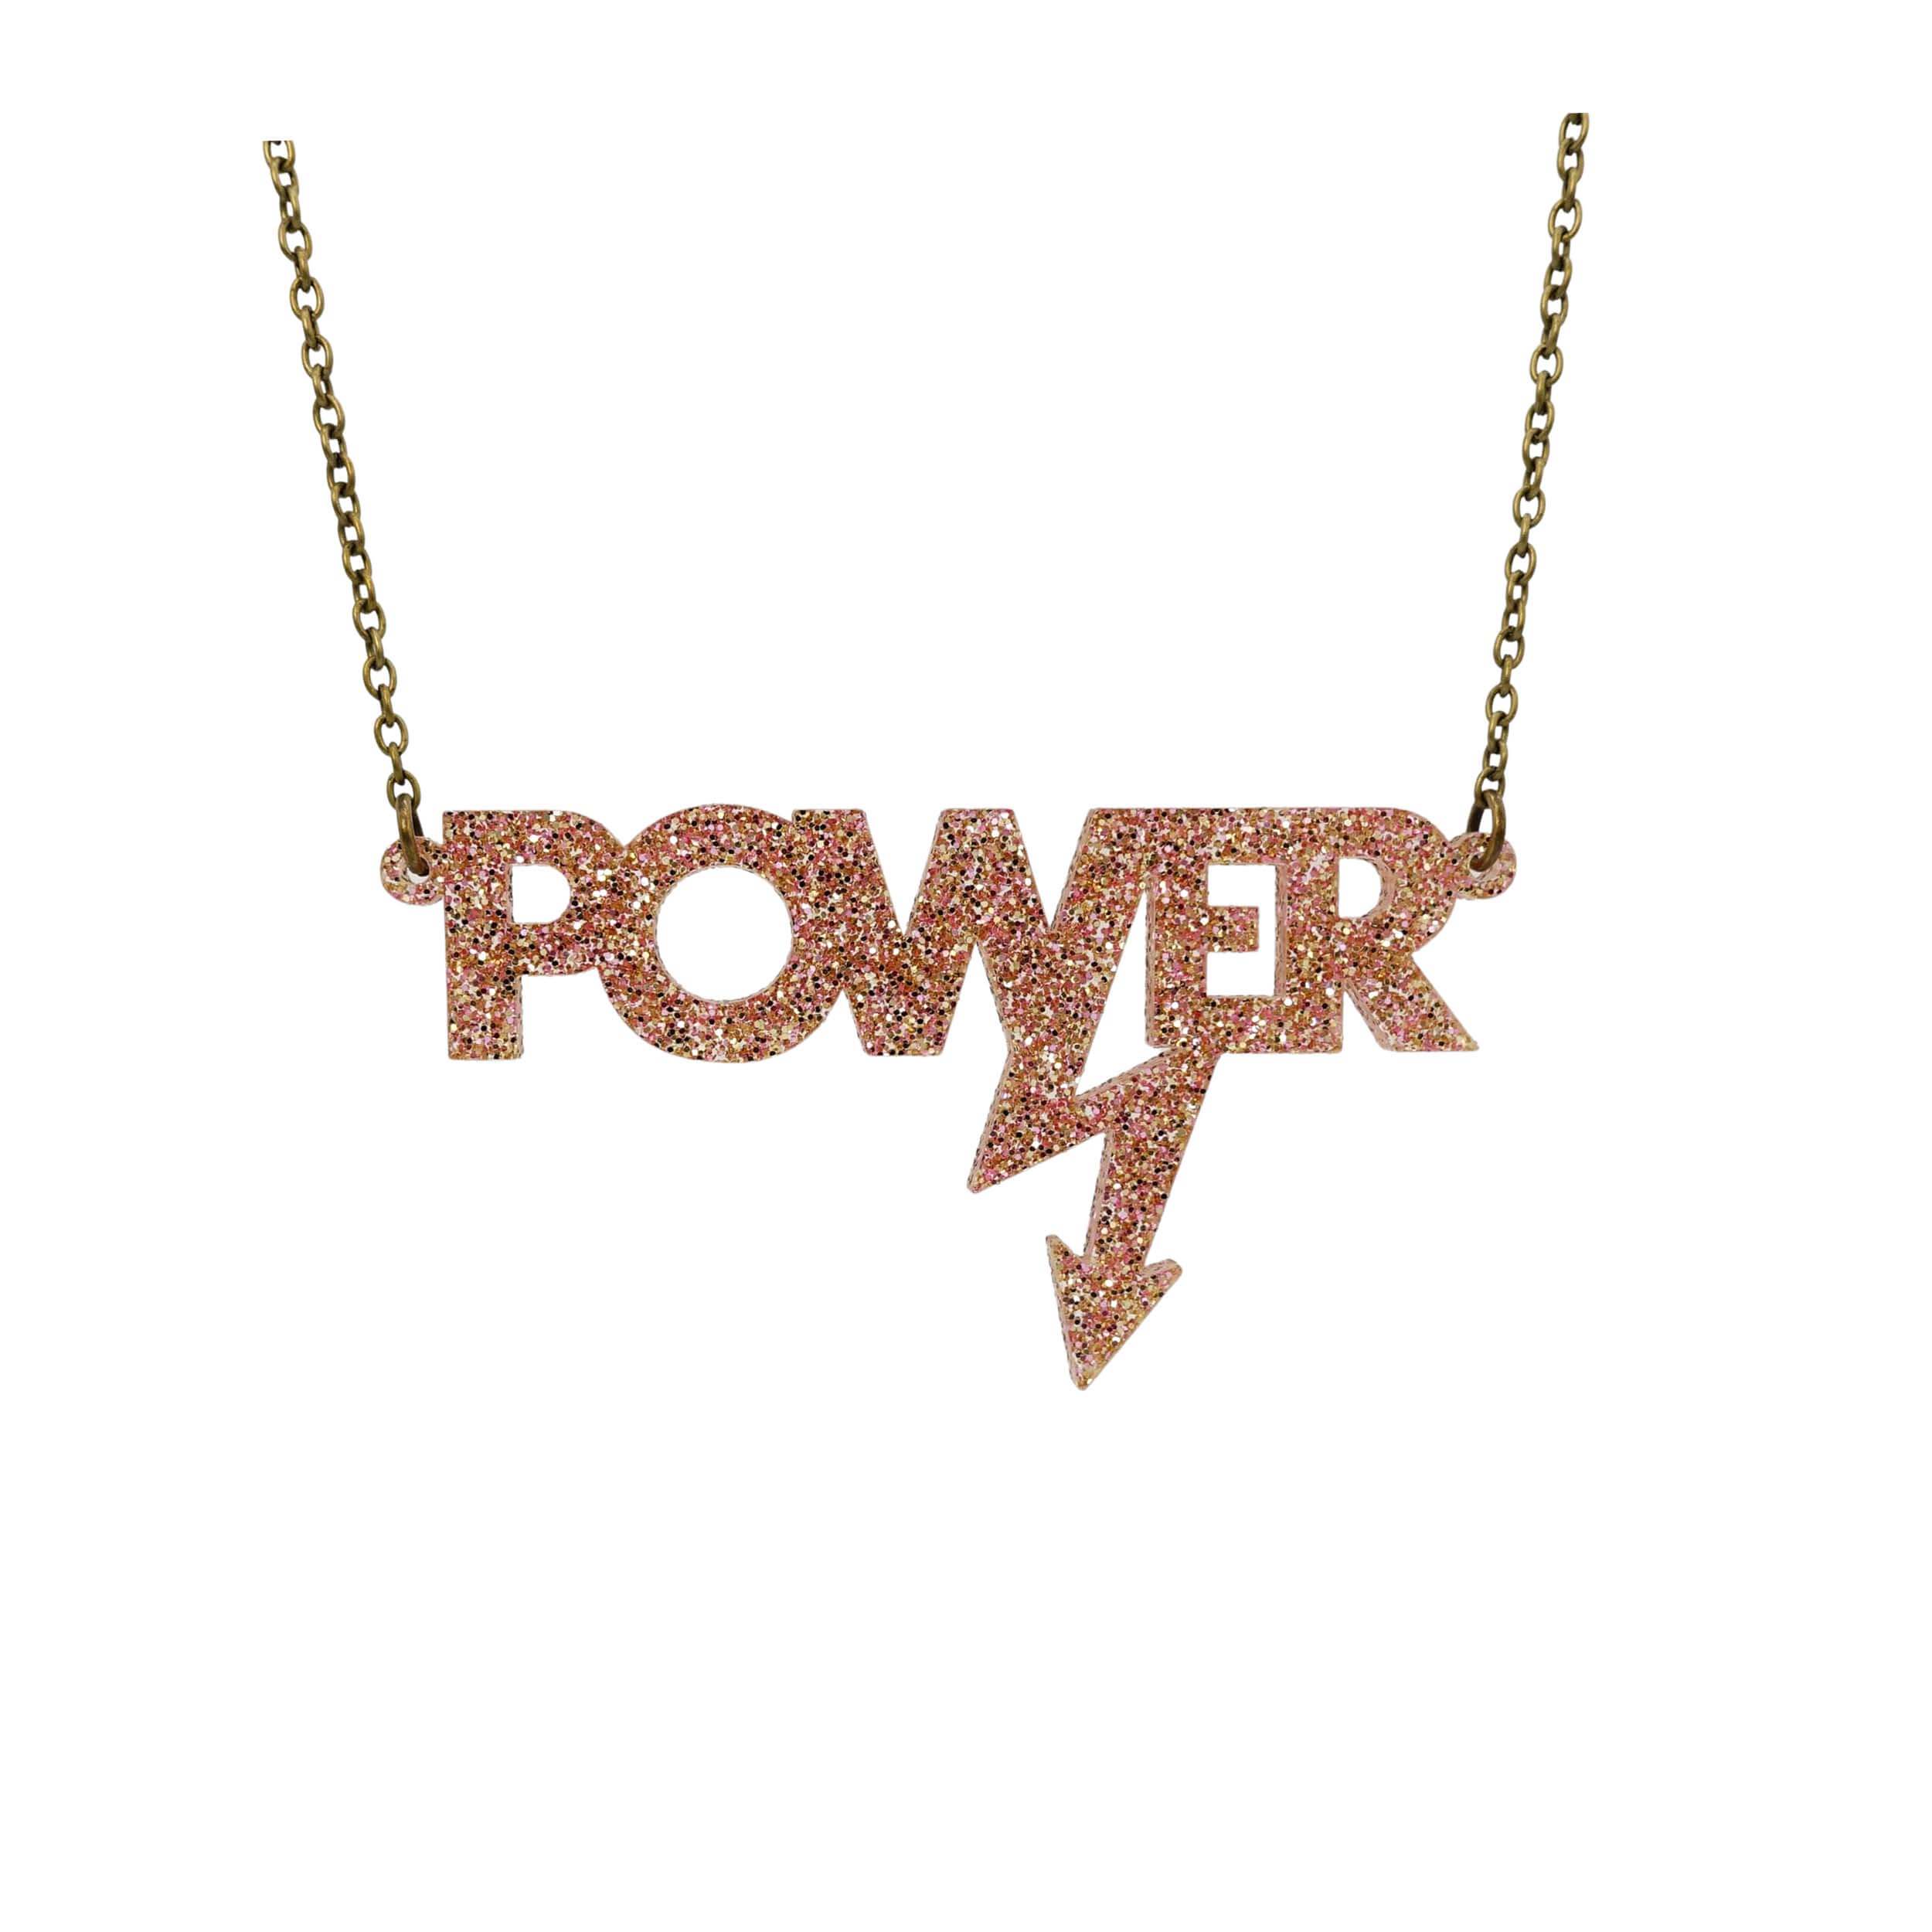 Big Power necklace in pink fizz glitter, shown hanging against a white background.